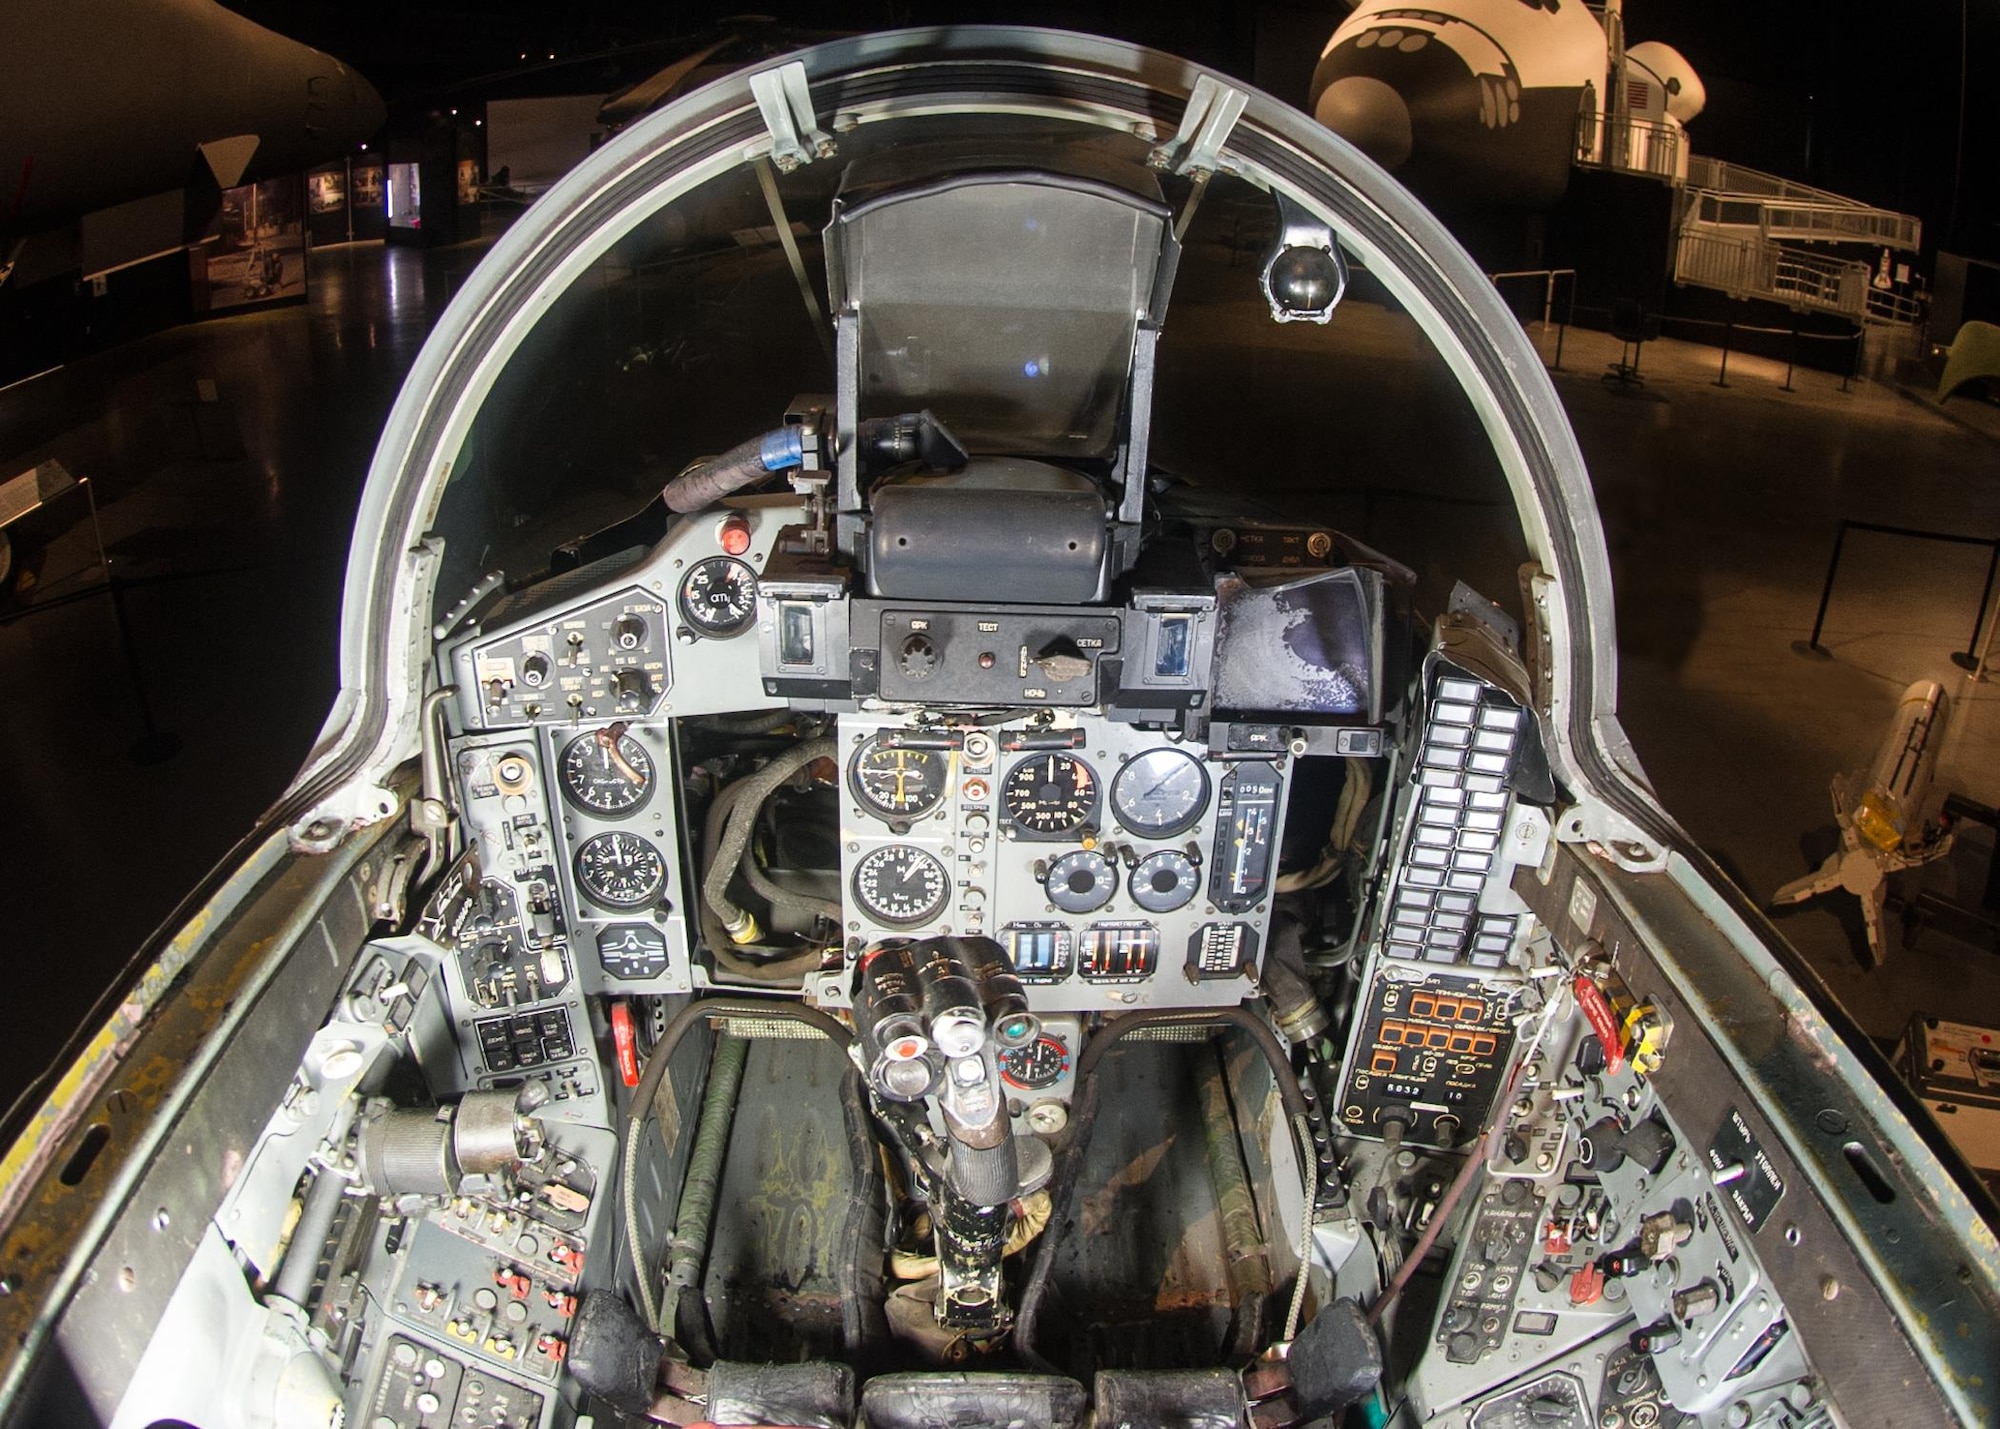 DAYTON, Ohio -- Mikoyan-Gurevich MiG-29A cockpit in the Cold War Gallery at the National Museum of the United States Air Force. (U.S. Air Force photo by Ken LaRock) 